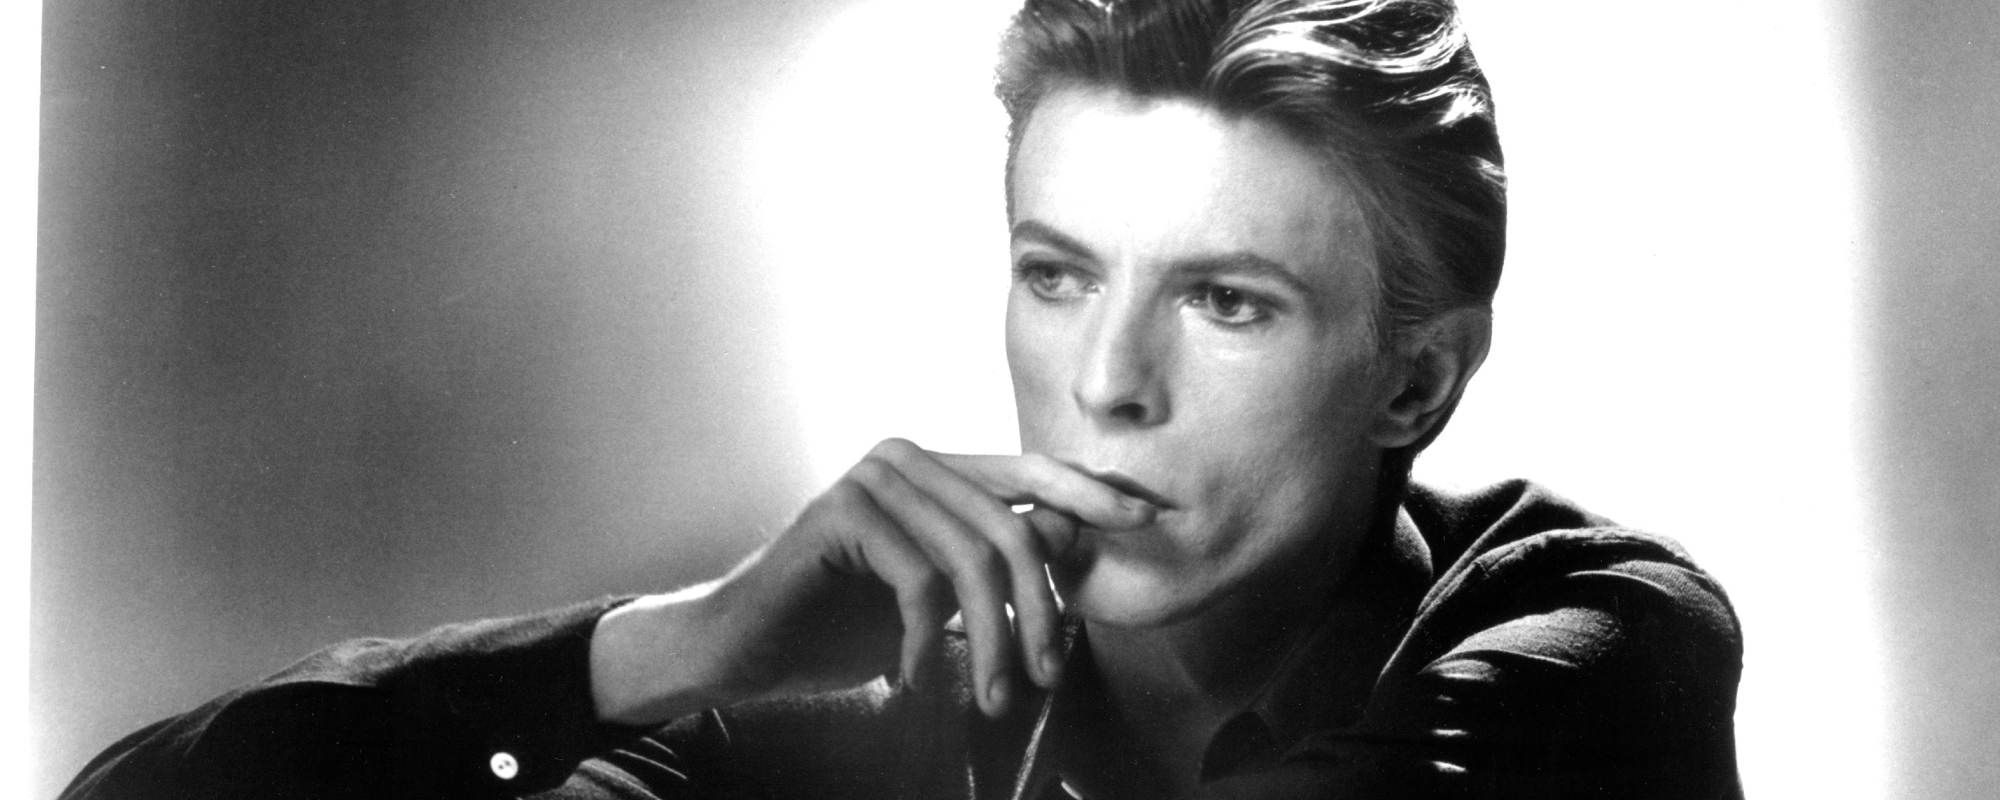 How David Bowie’s “Let’s Dance” Transformed From Flop Folk Number to Star-Studded Dance Hit